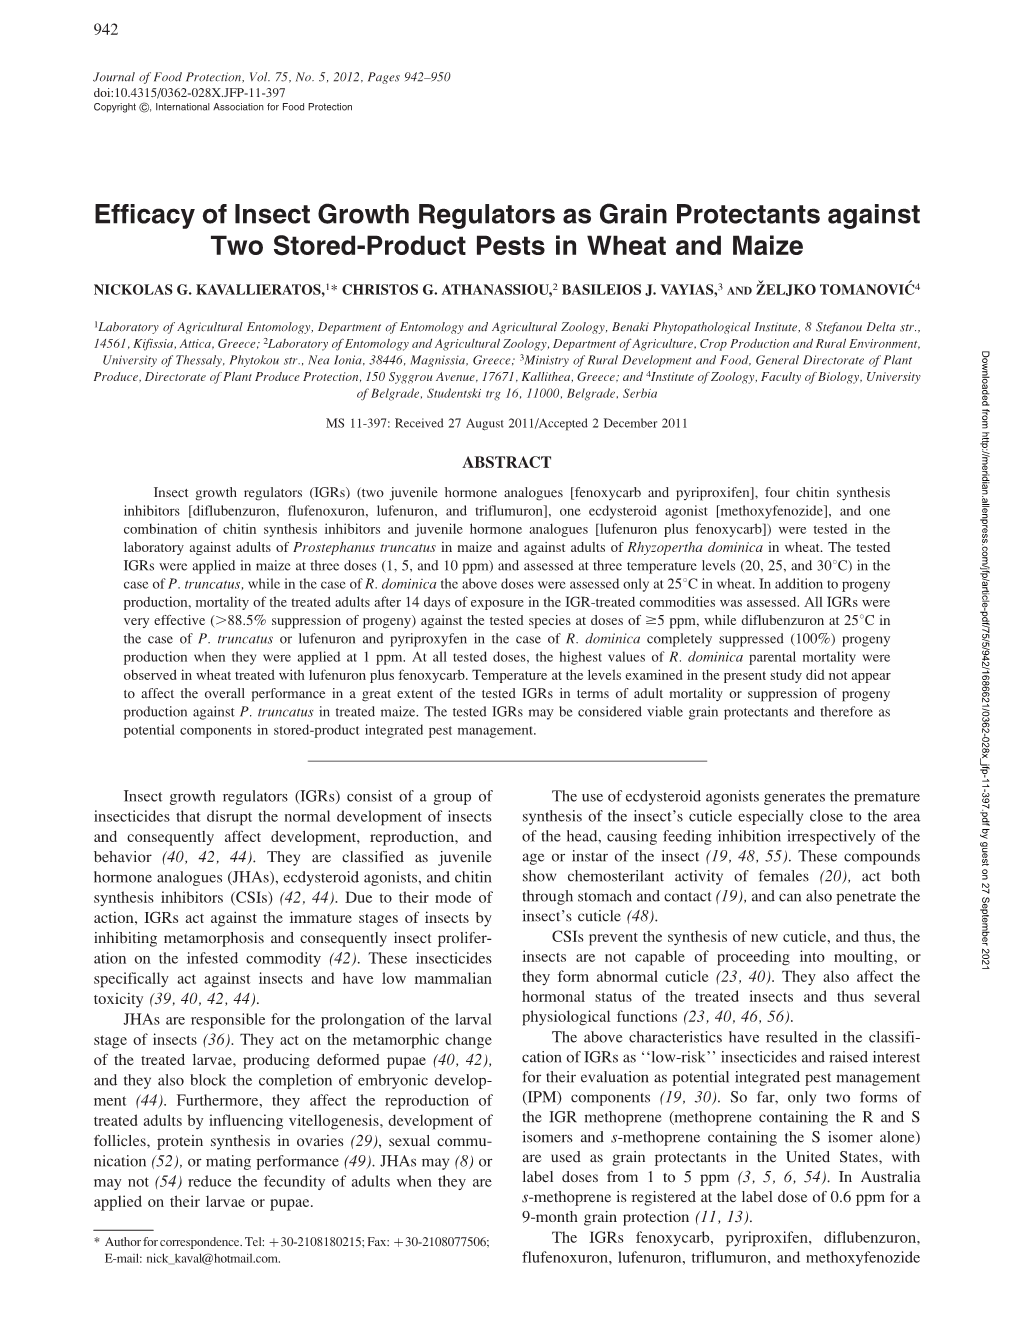 Efficacy of Insect Growth Regulators As Grain Protectants Against Two Stored-Product Pests in Wheat and Maize